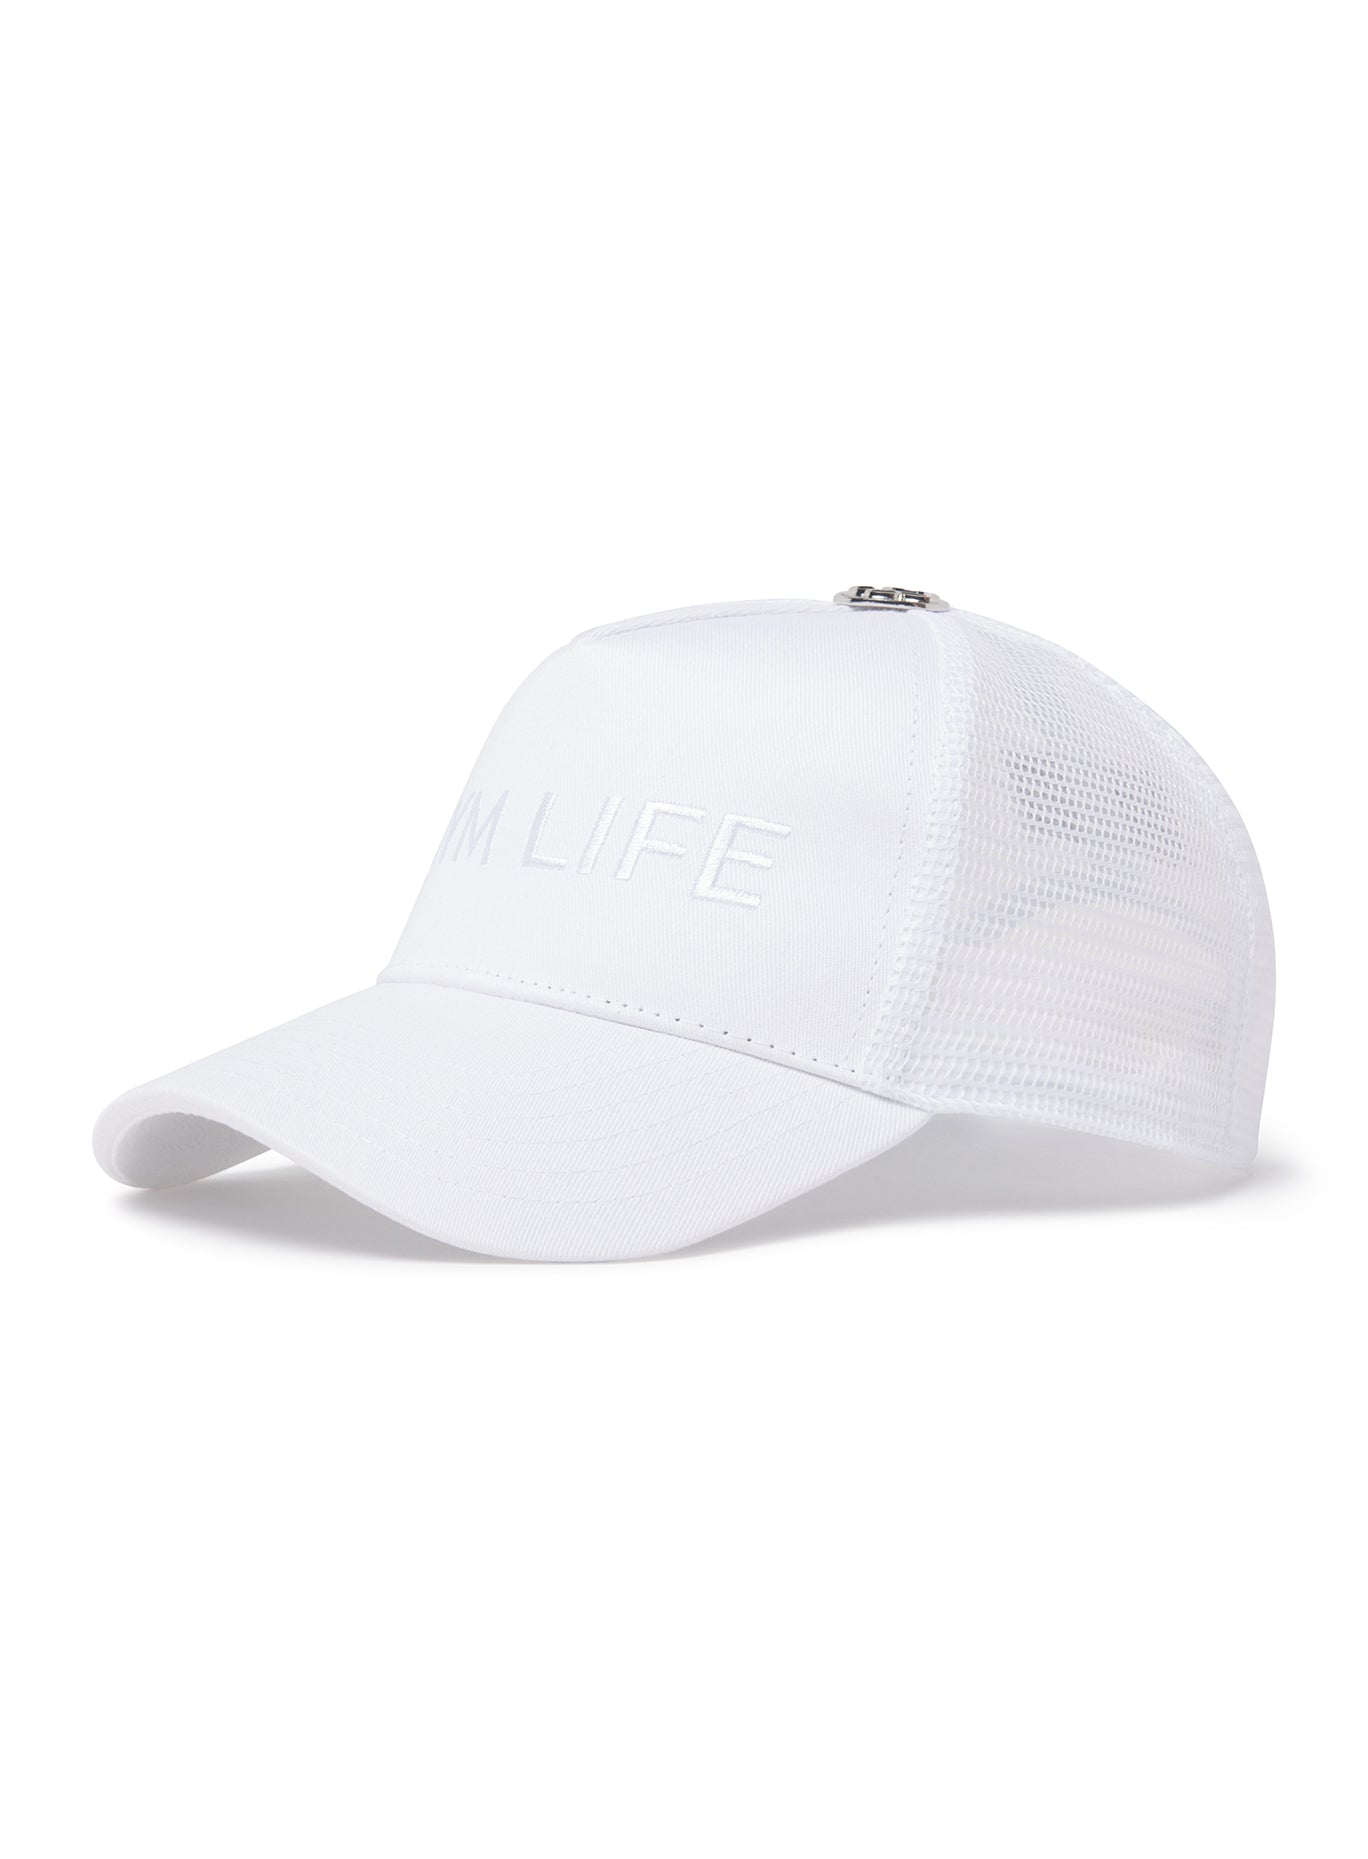 Left side view of our gym life hat with a mesh at the back 